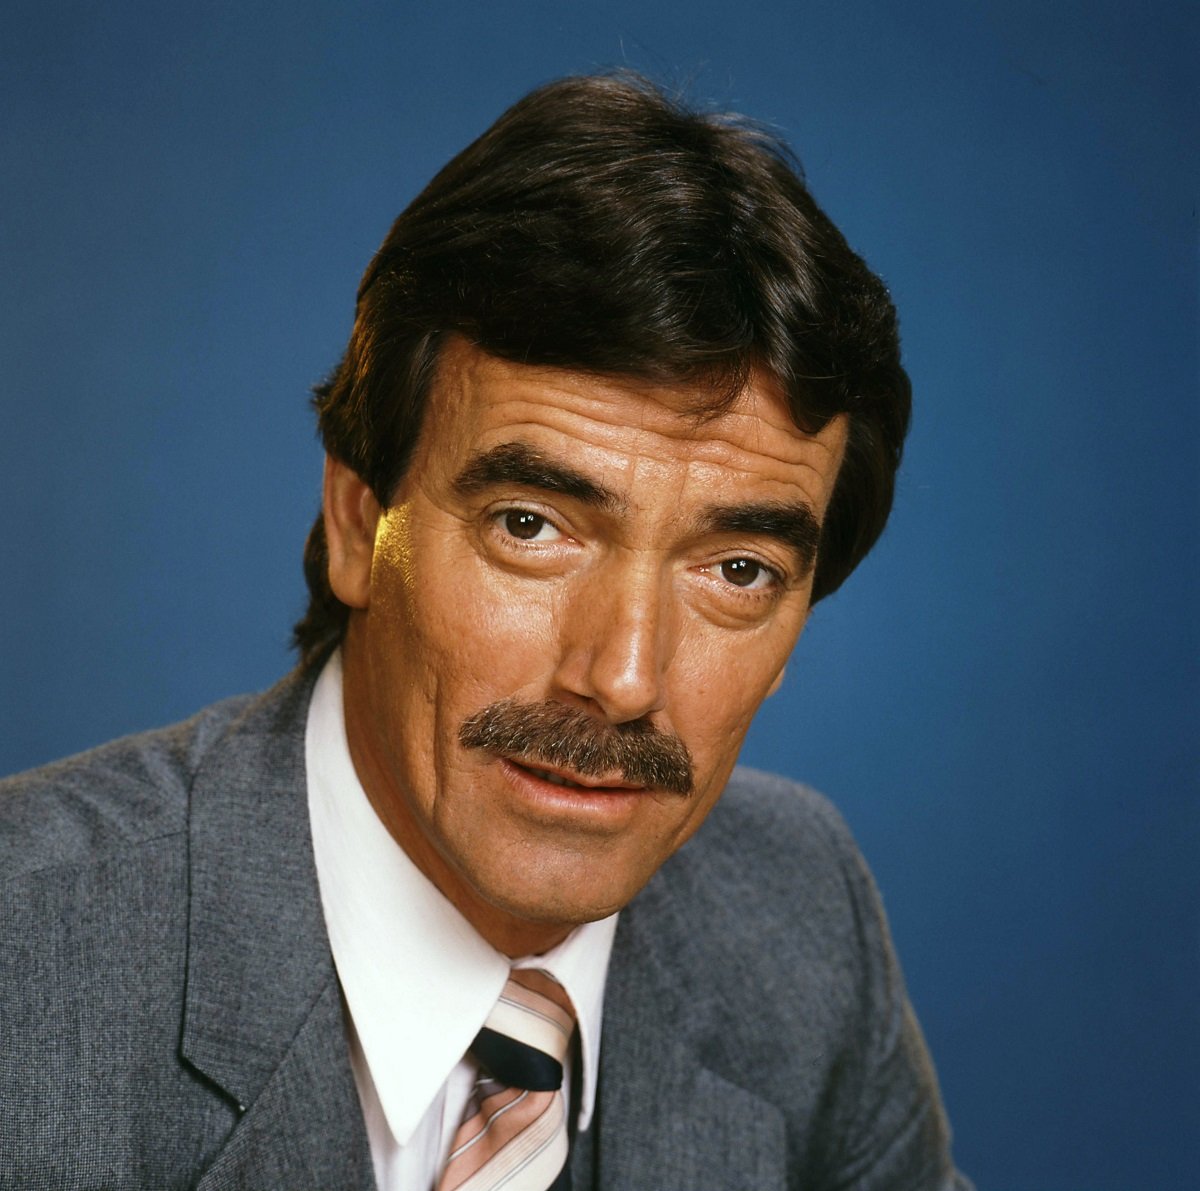 'The Young and the Restless' actor Eric Braeden in a 1980 promotional photo for his debut as Victor Newman.